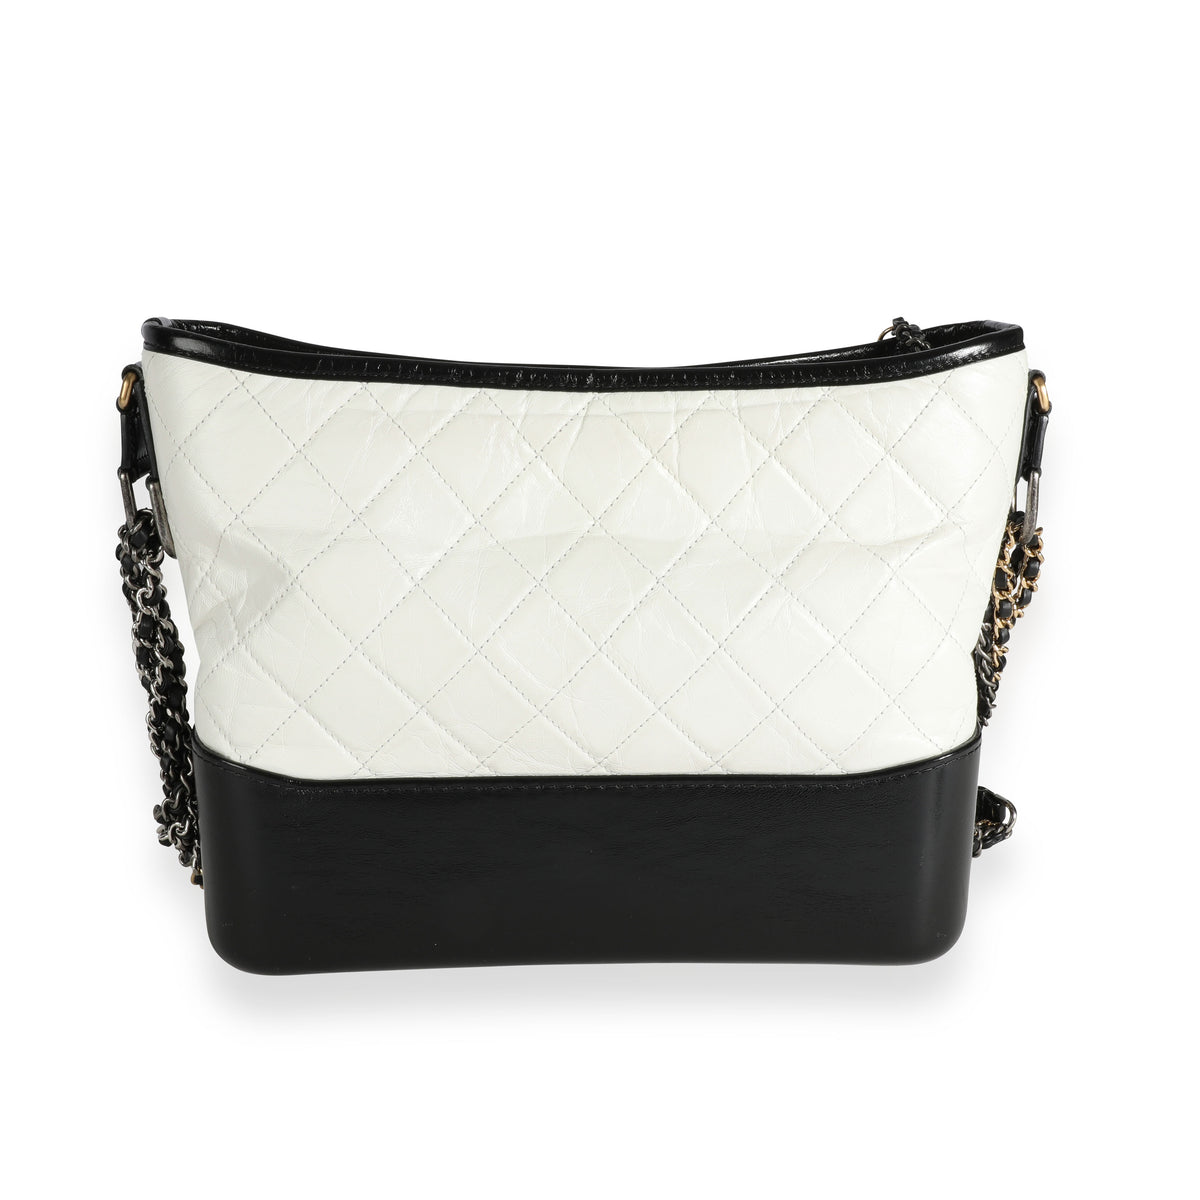 CHANEL Iridescent Aged calf leather Quilted Small Gabrielle Bag